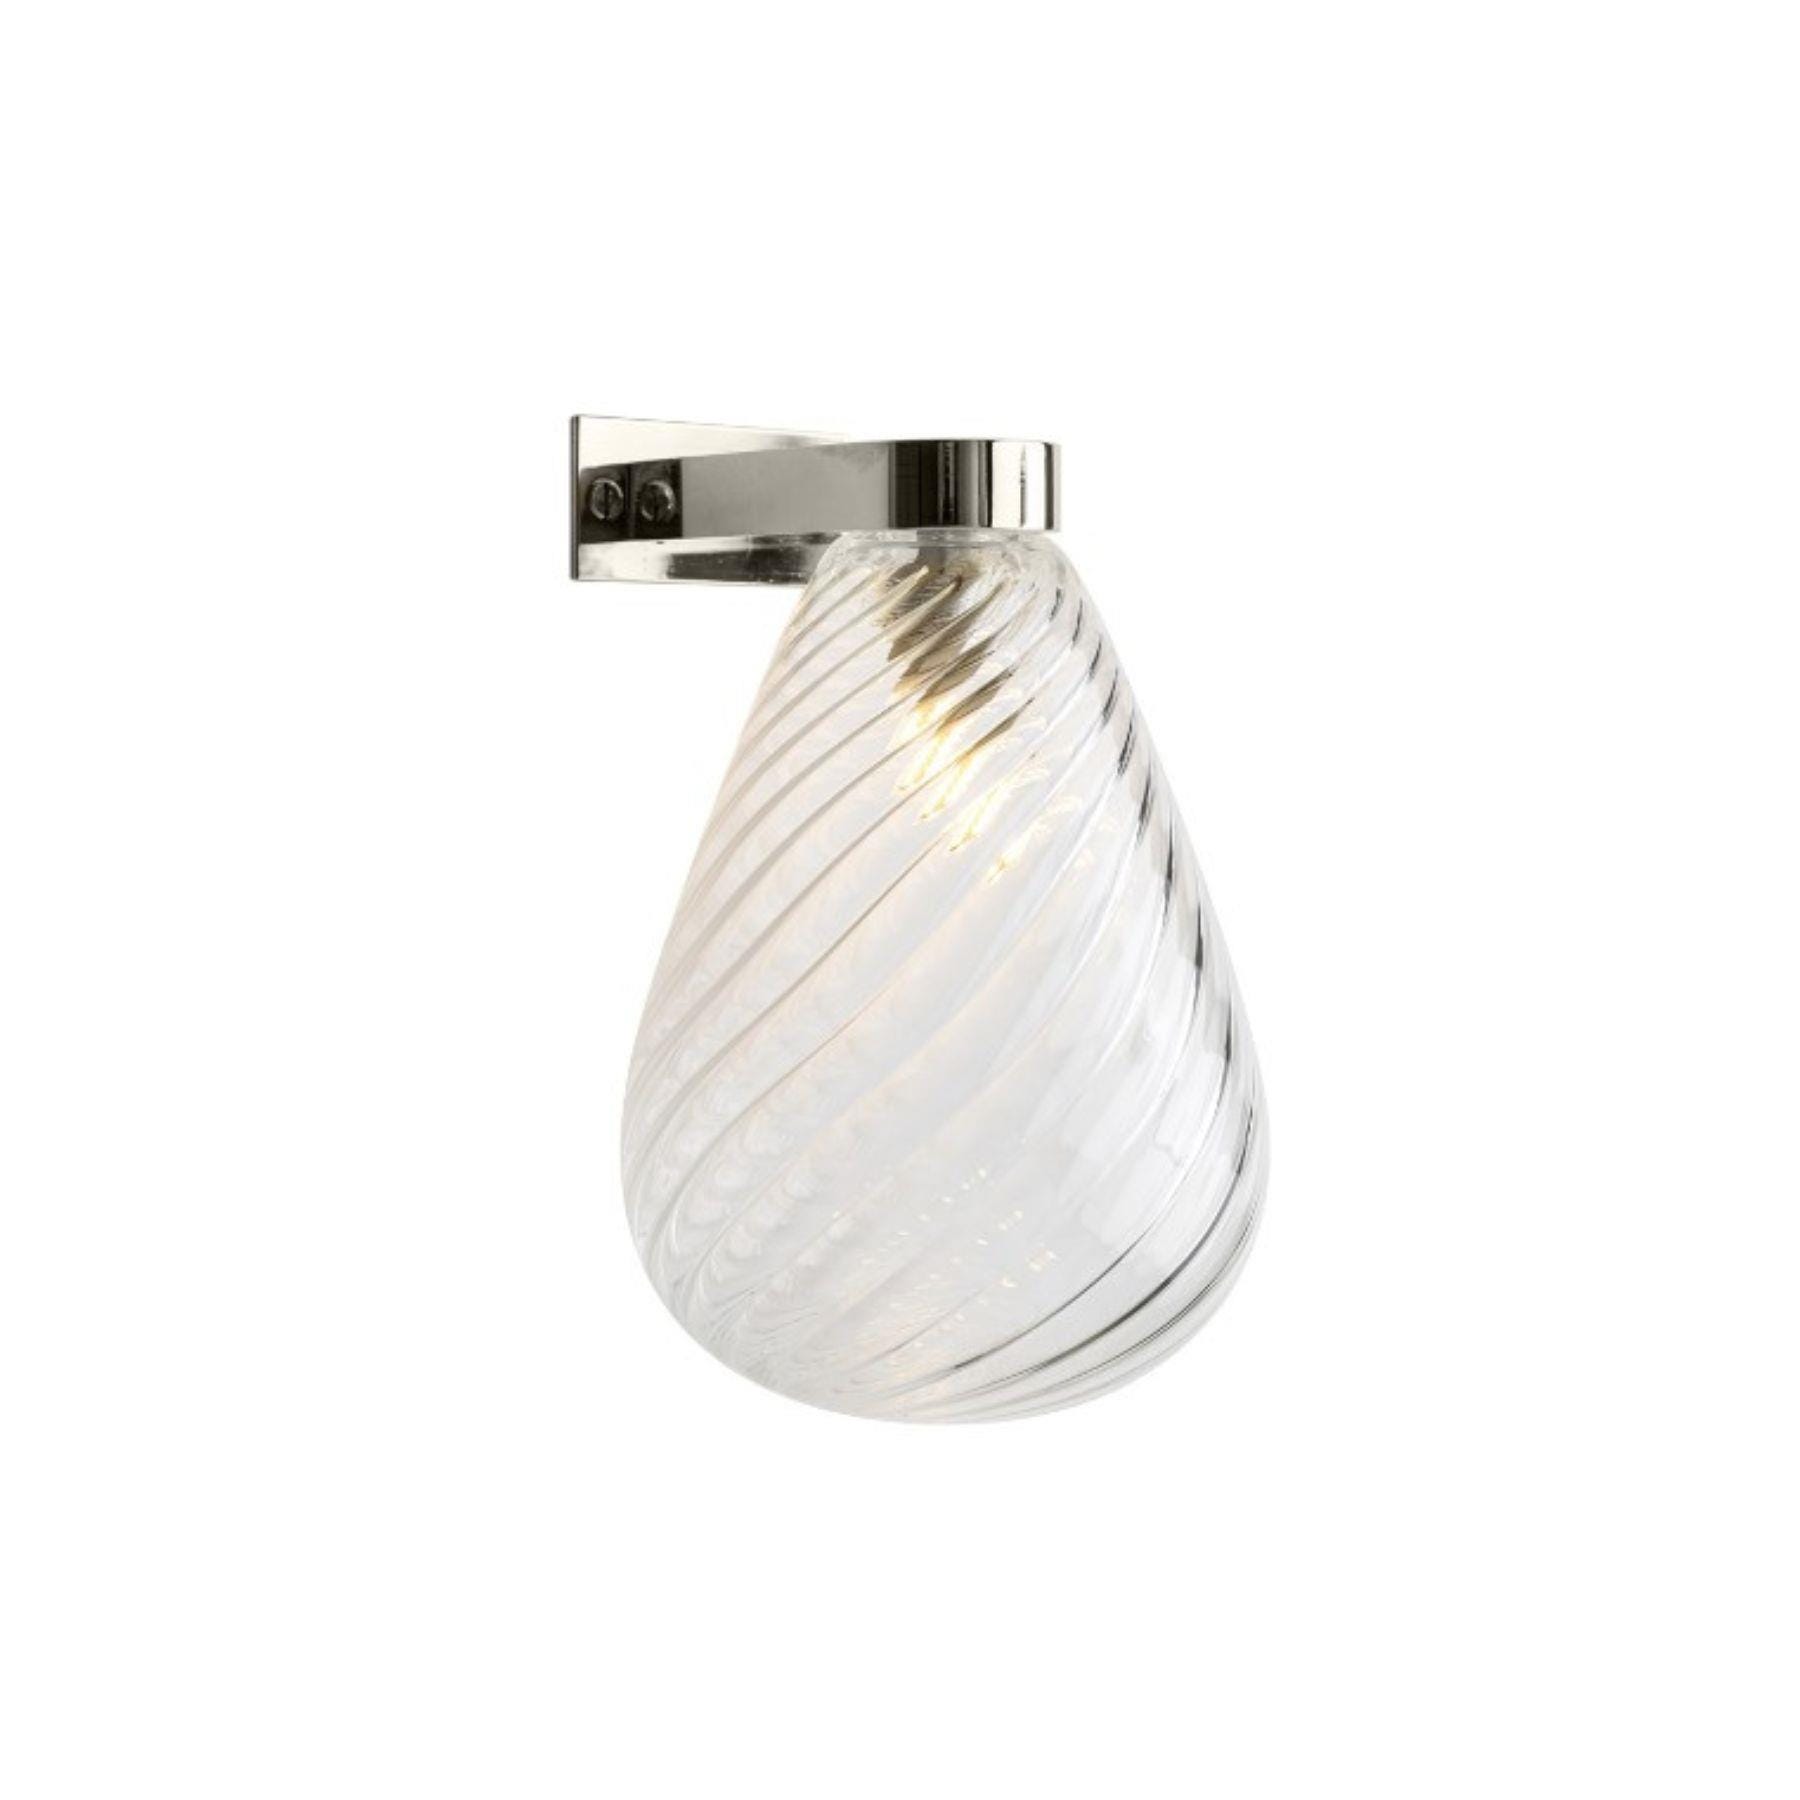 Leverint Kingston Deco Wall Light Fine Ribbed Wall Lighting Clear